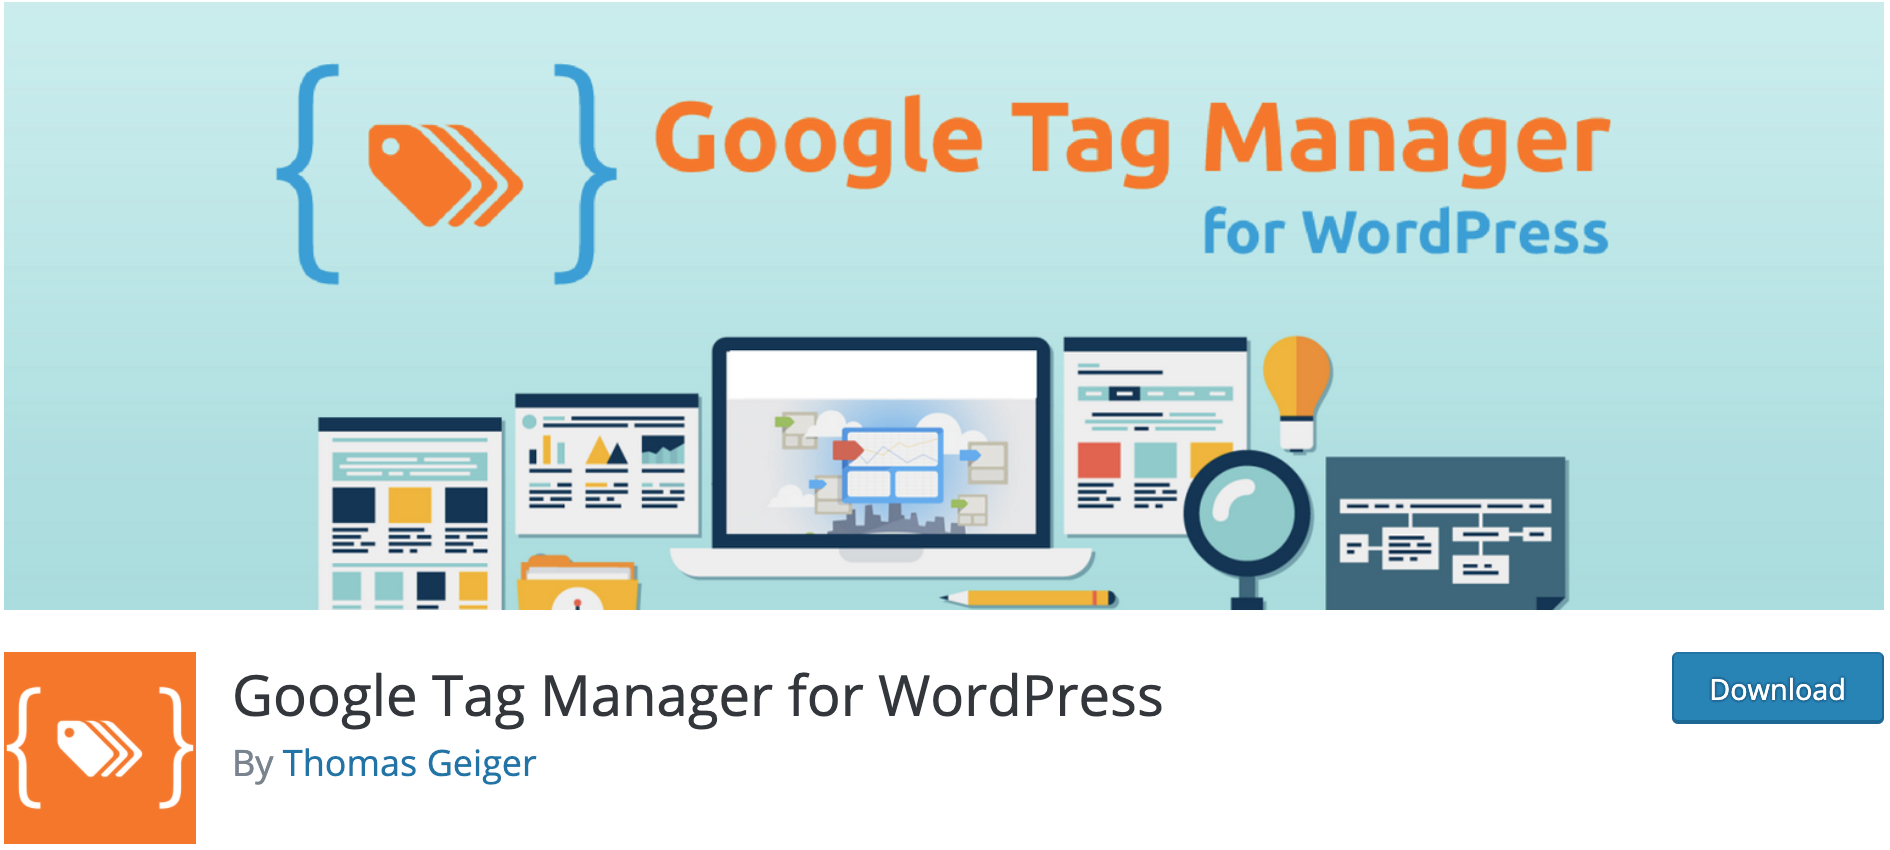 Google Tag Manager for WordPress plugin presentation and download page on wordpress.org